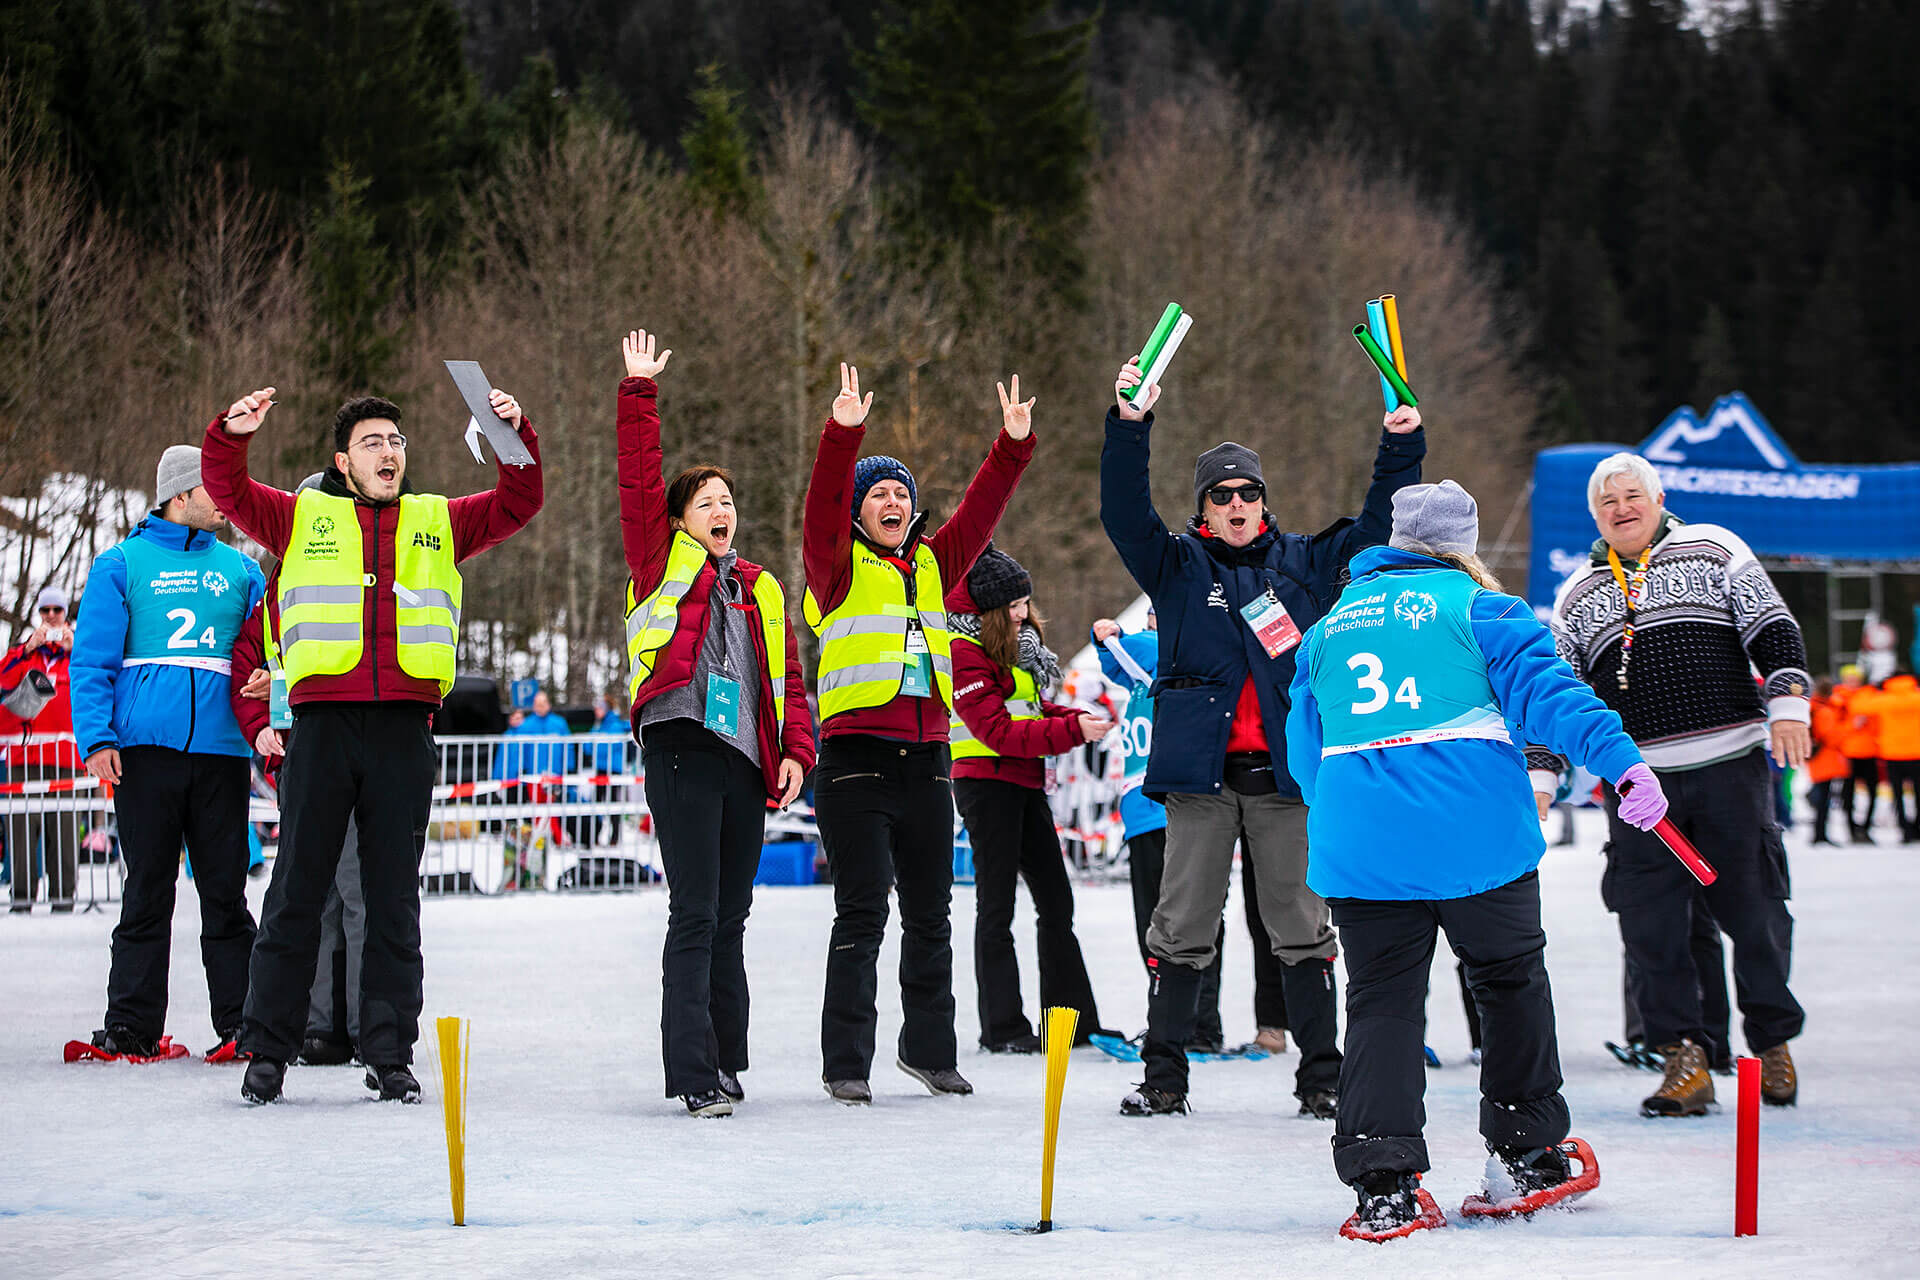 Special Olympics Germany 2020 Winter Games: in high spirits approaching the finish line in snowshoes